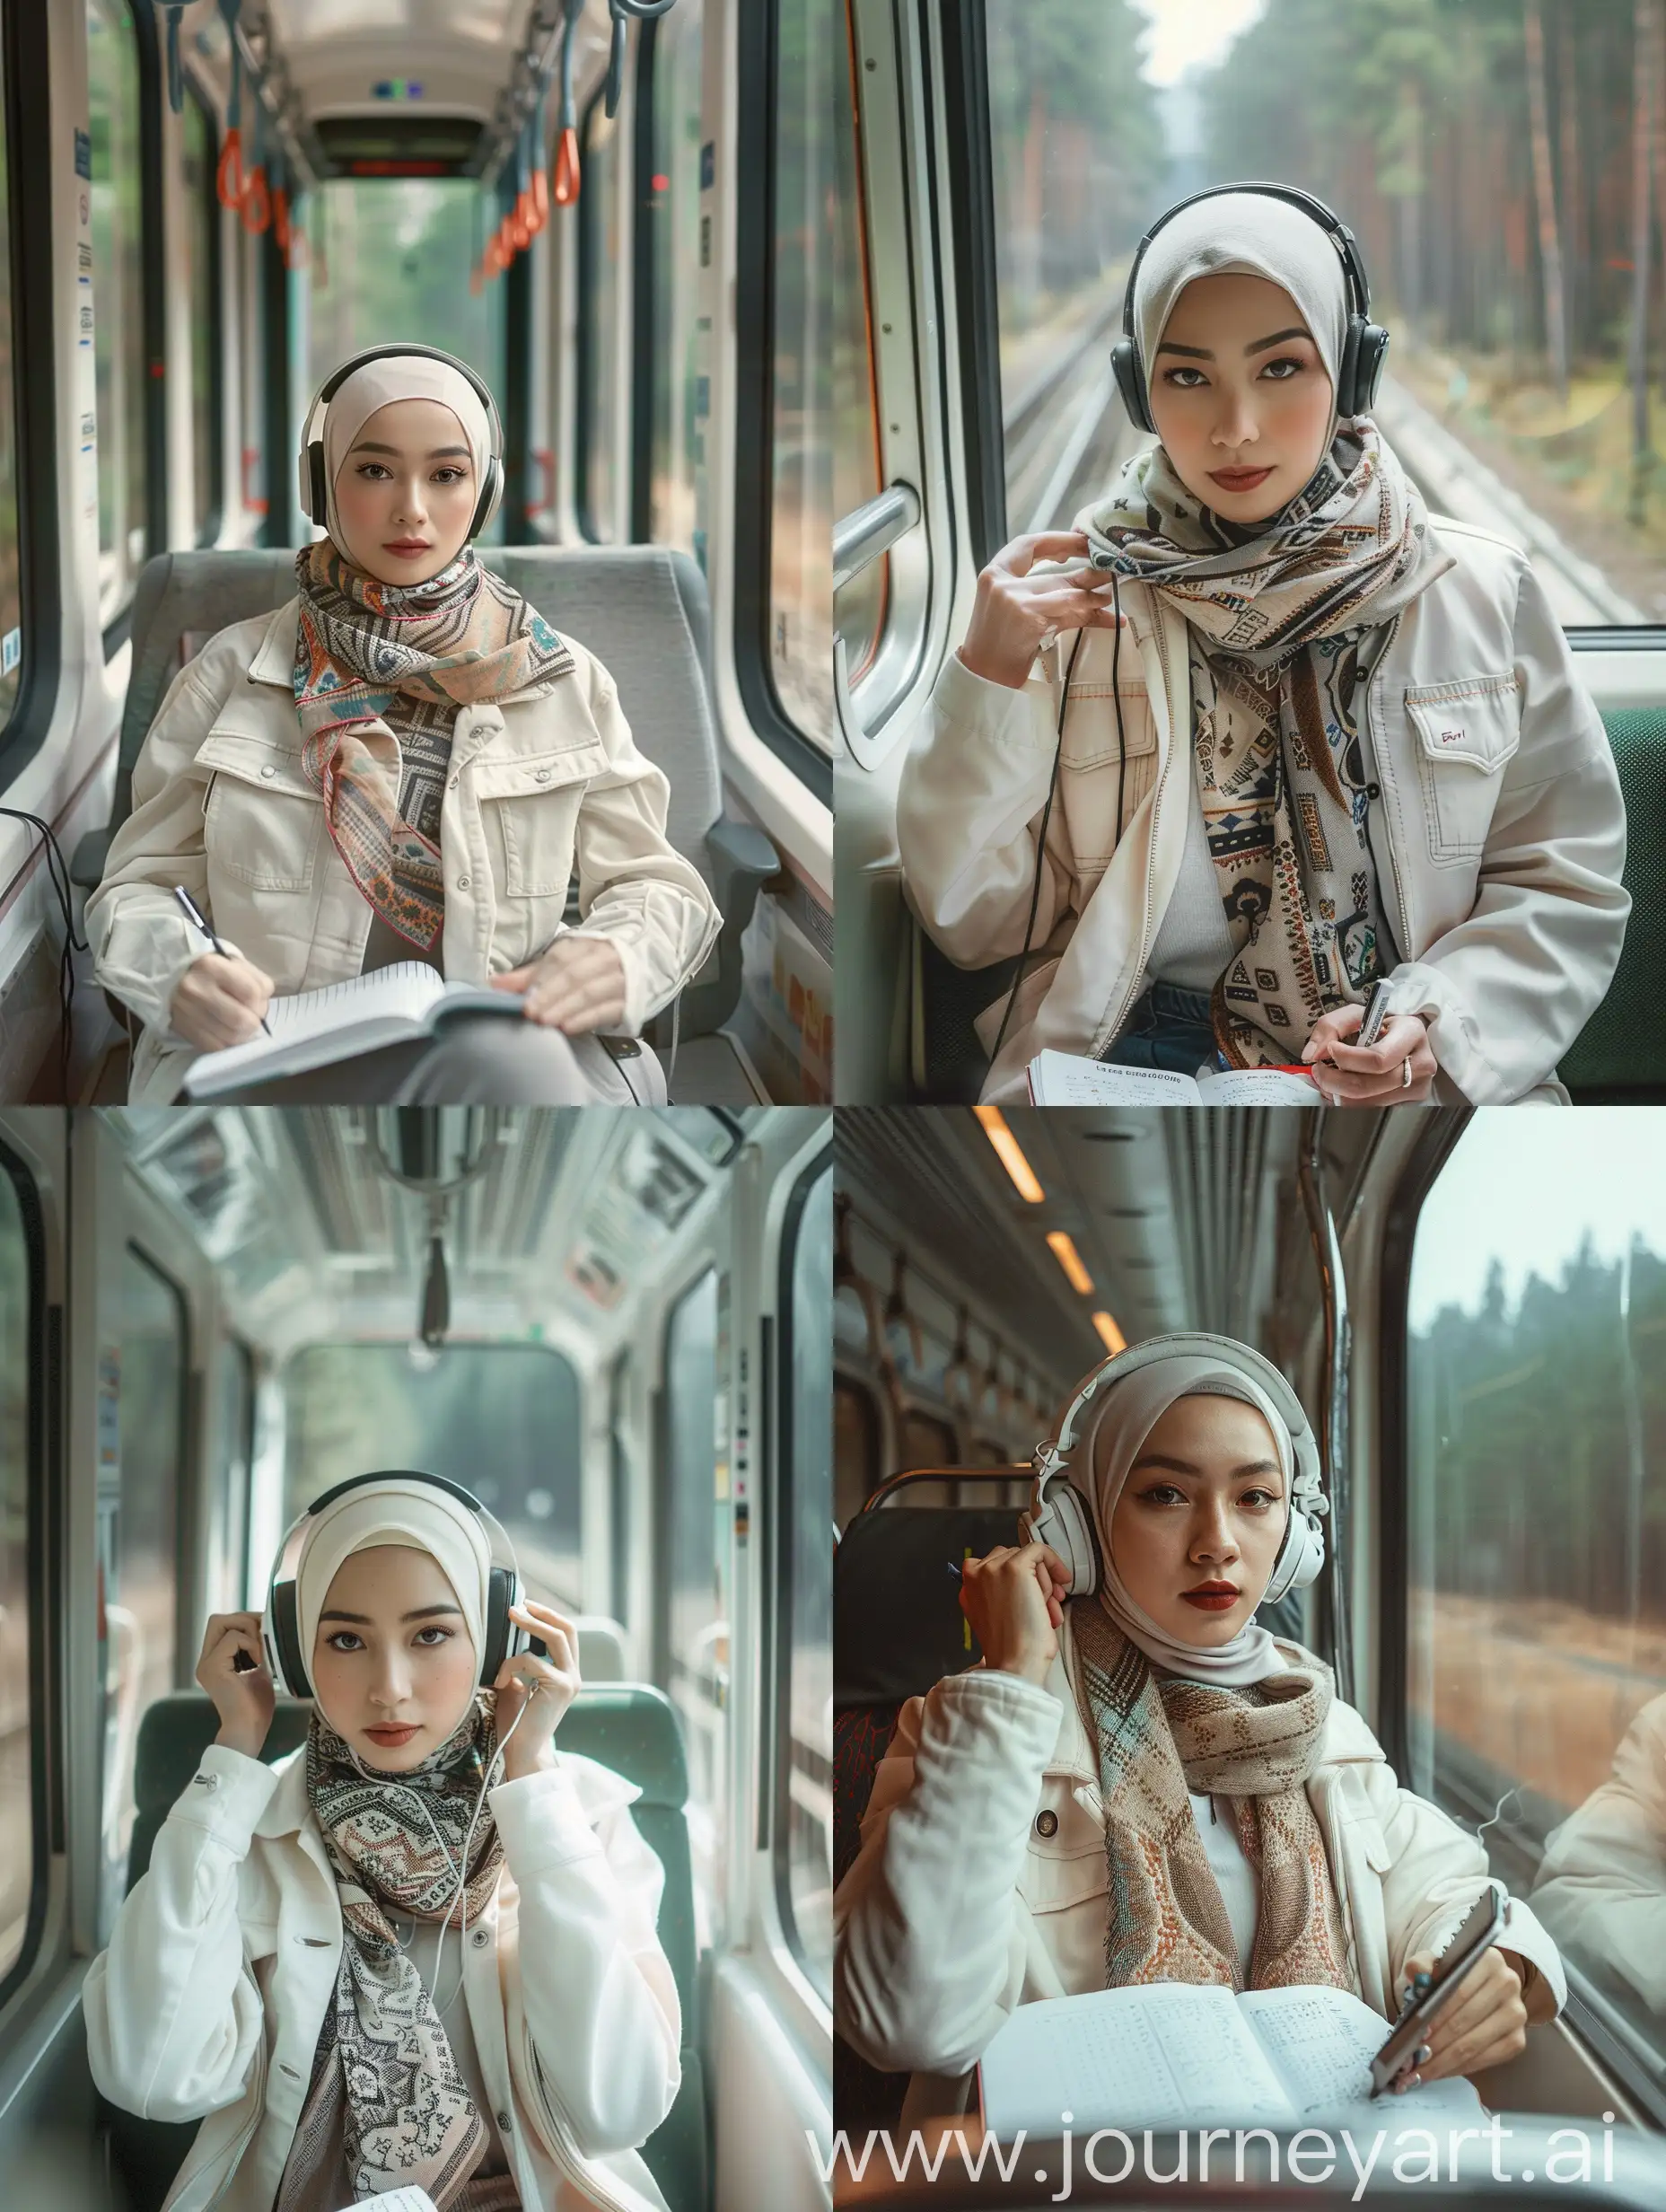 Thai-Woman-in-Hijab-Puts-on-Trucker-Jacket-and-Scarf-in-Train-Car-Portrait